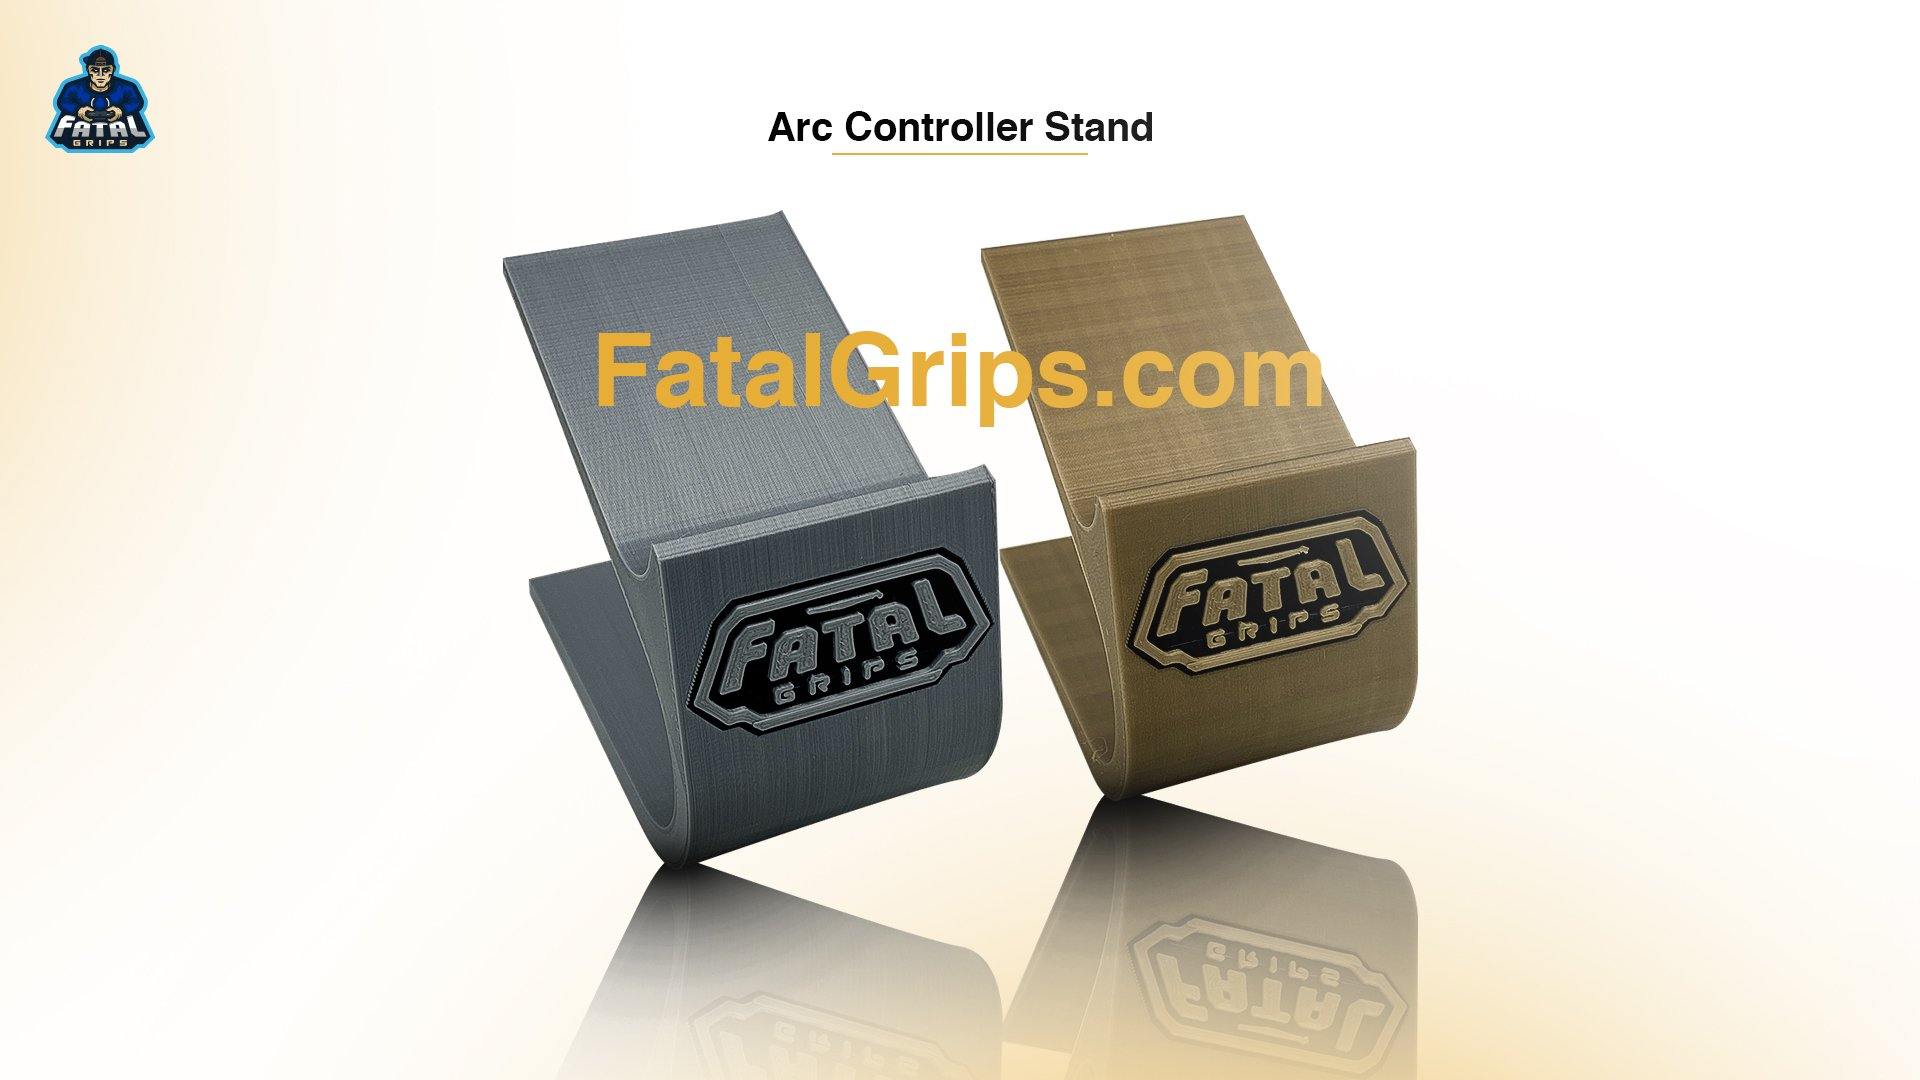 Arc Controller Stand - Fatal Grips